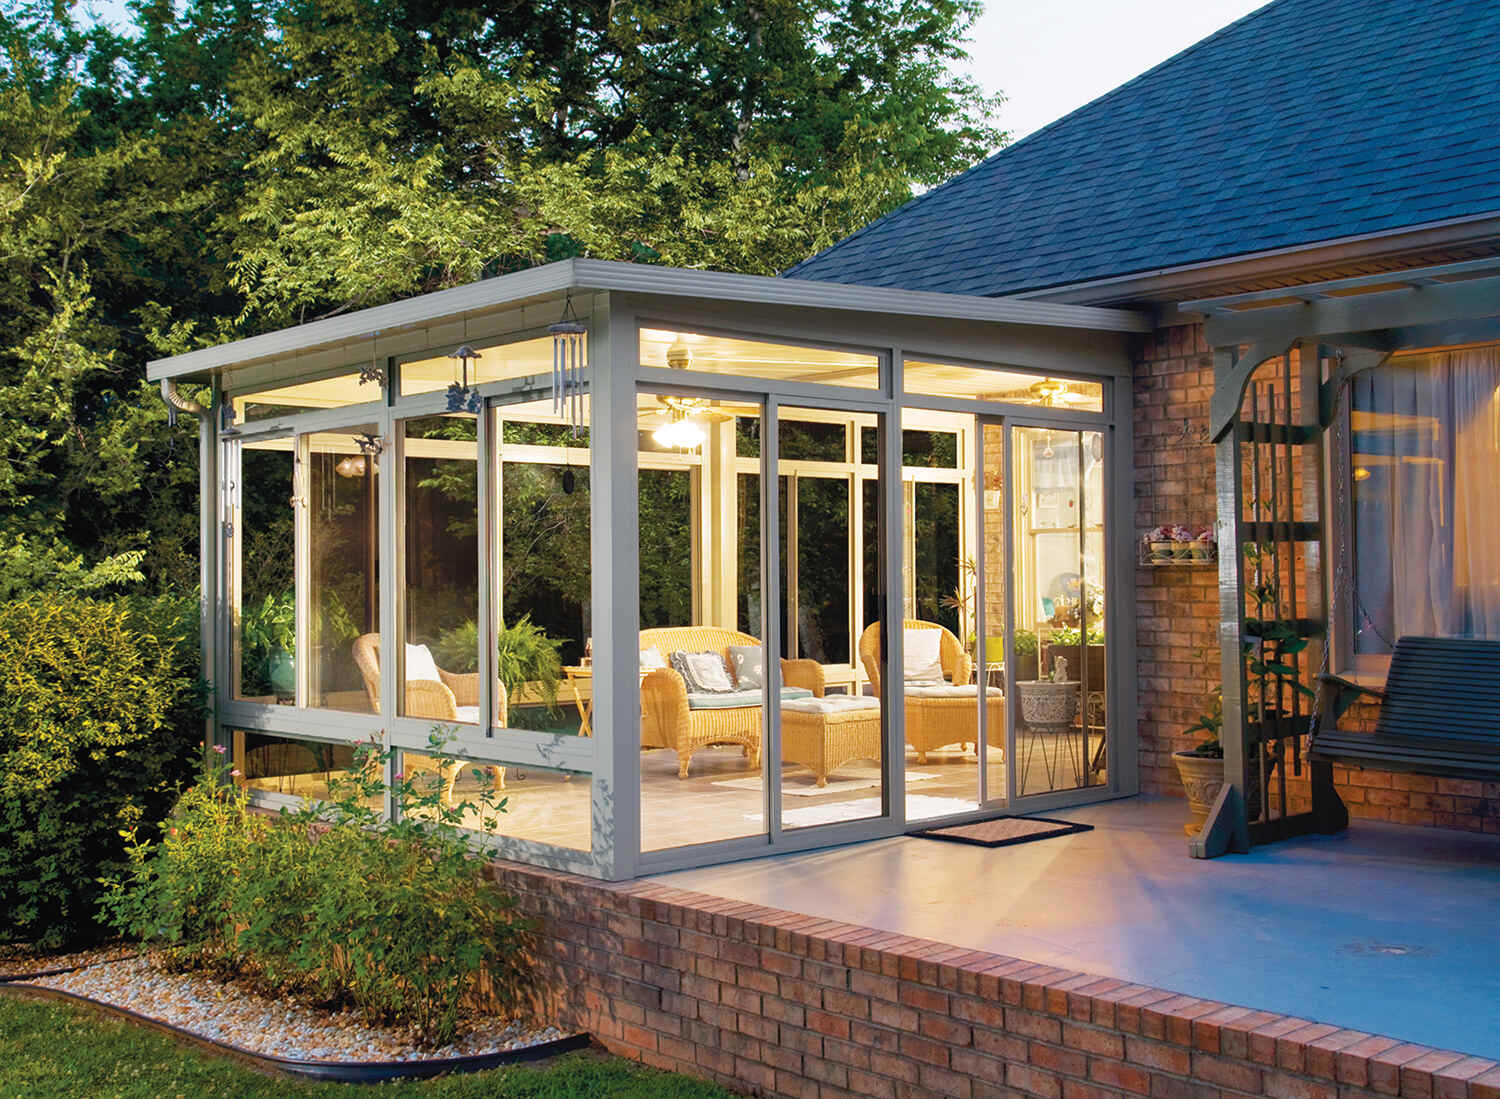 How To Turn A Patio Into A Sunroom